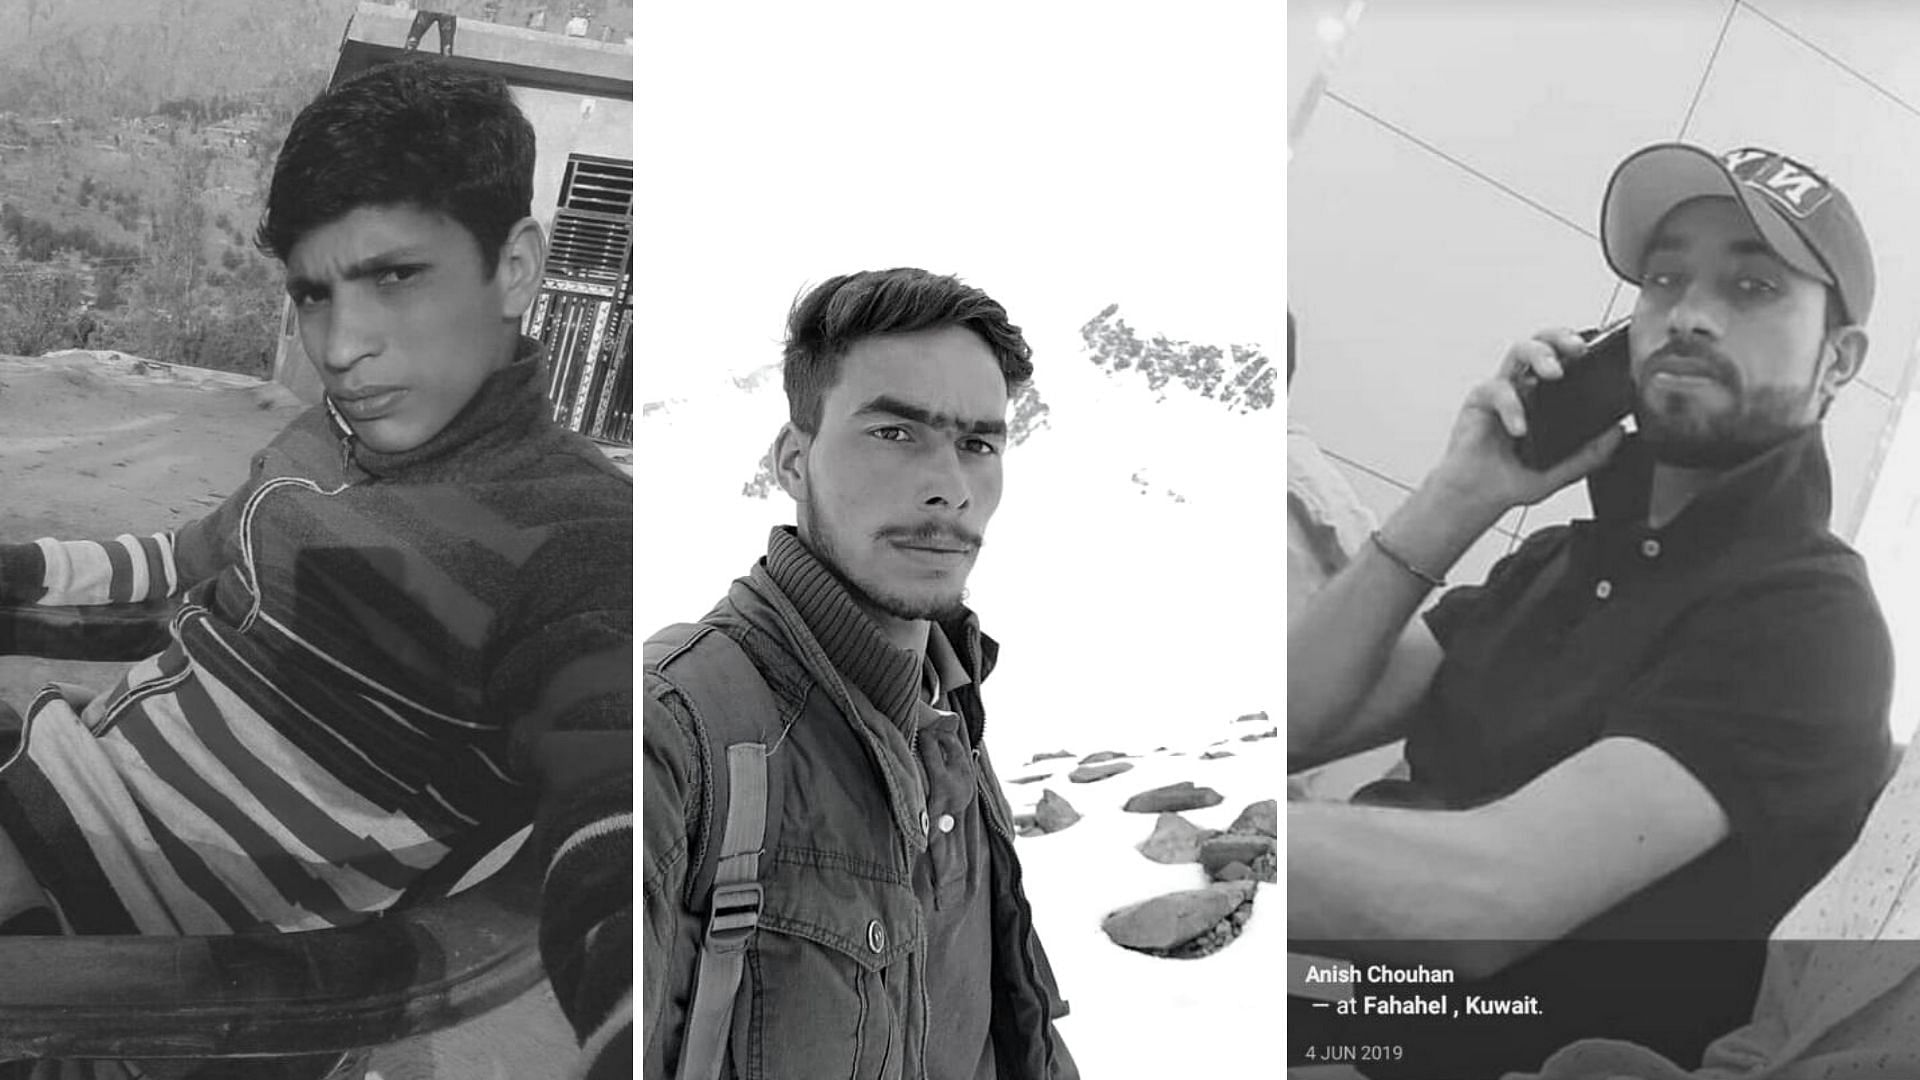 Three young cousins, who were missing from Rajouri district of Jammu and Kashmir, are believed to have been gunned down by the Army in an encounter last month.